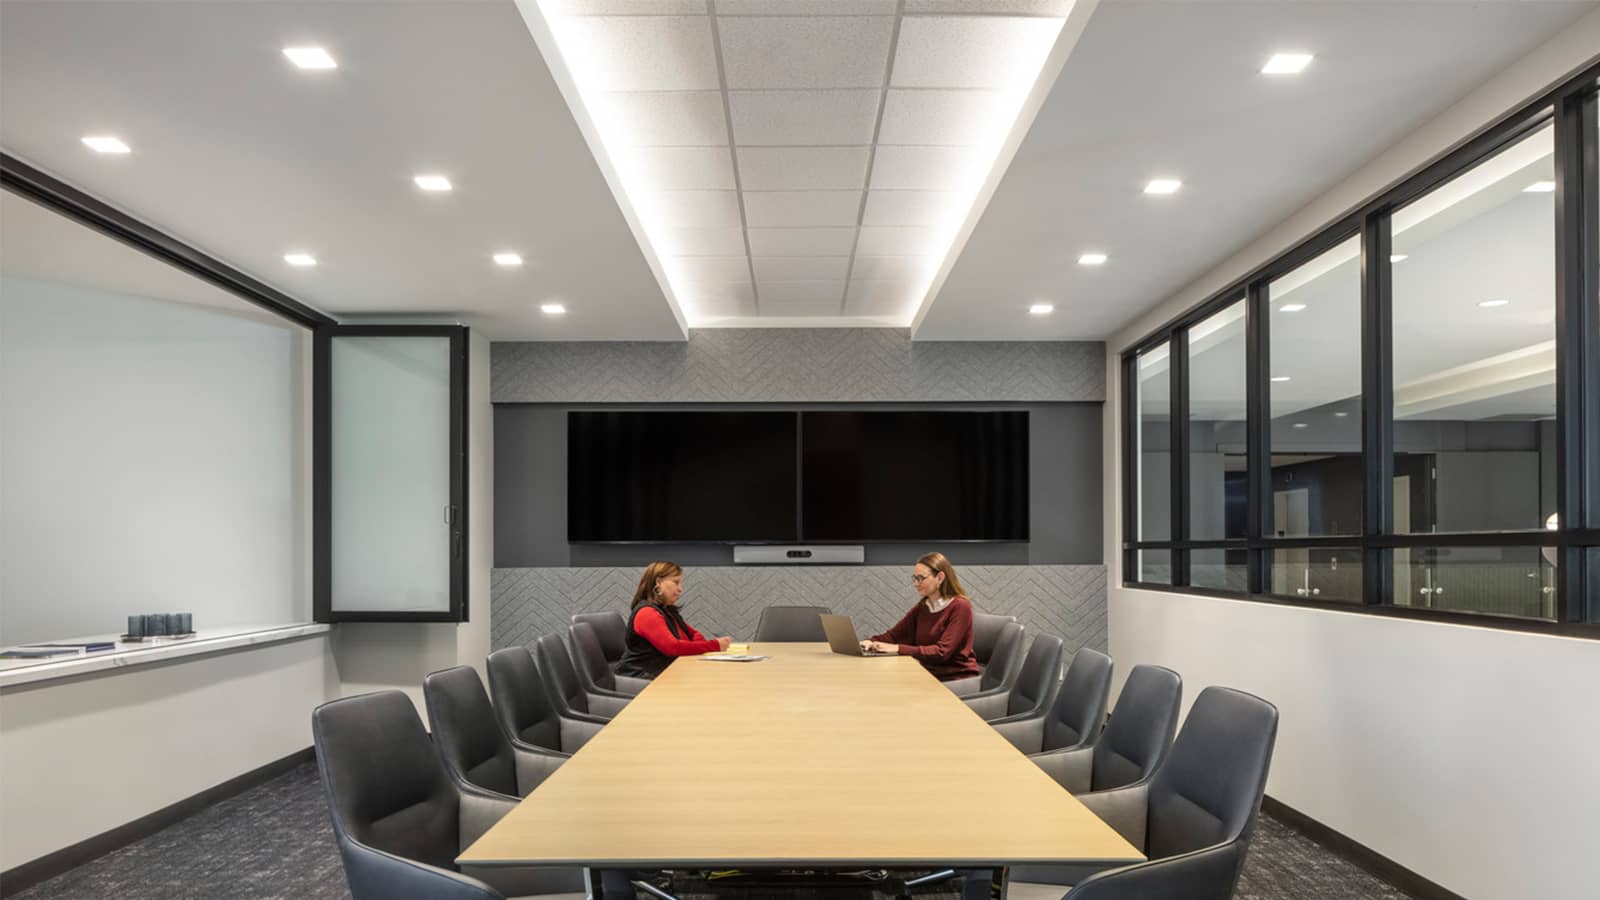 The conference room of Lockton in Denver